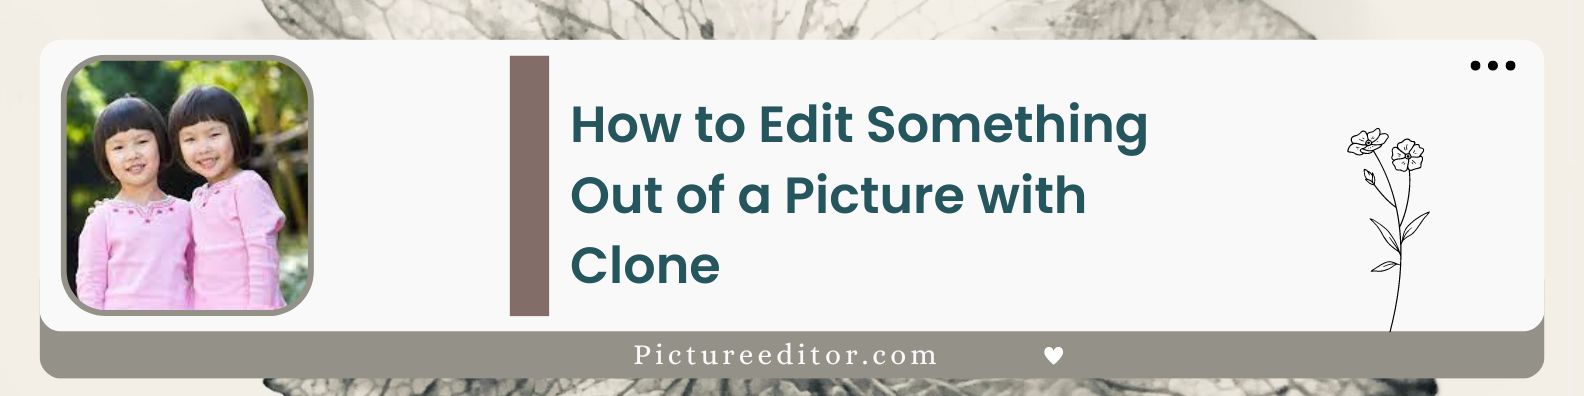 How to Edit Something Out of a Picture with Clone